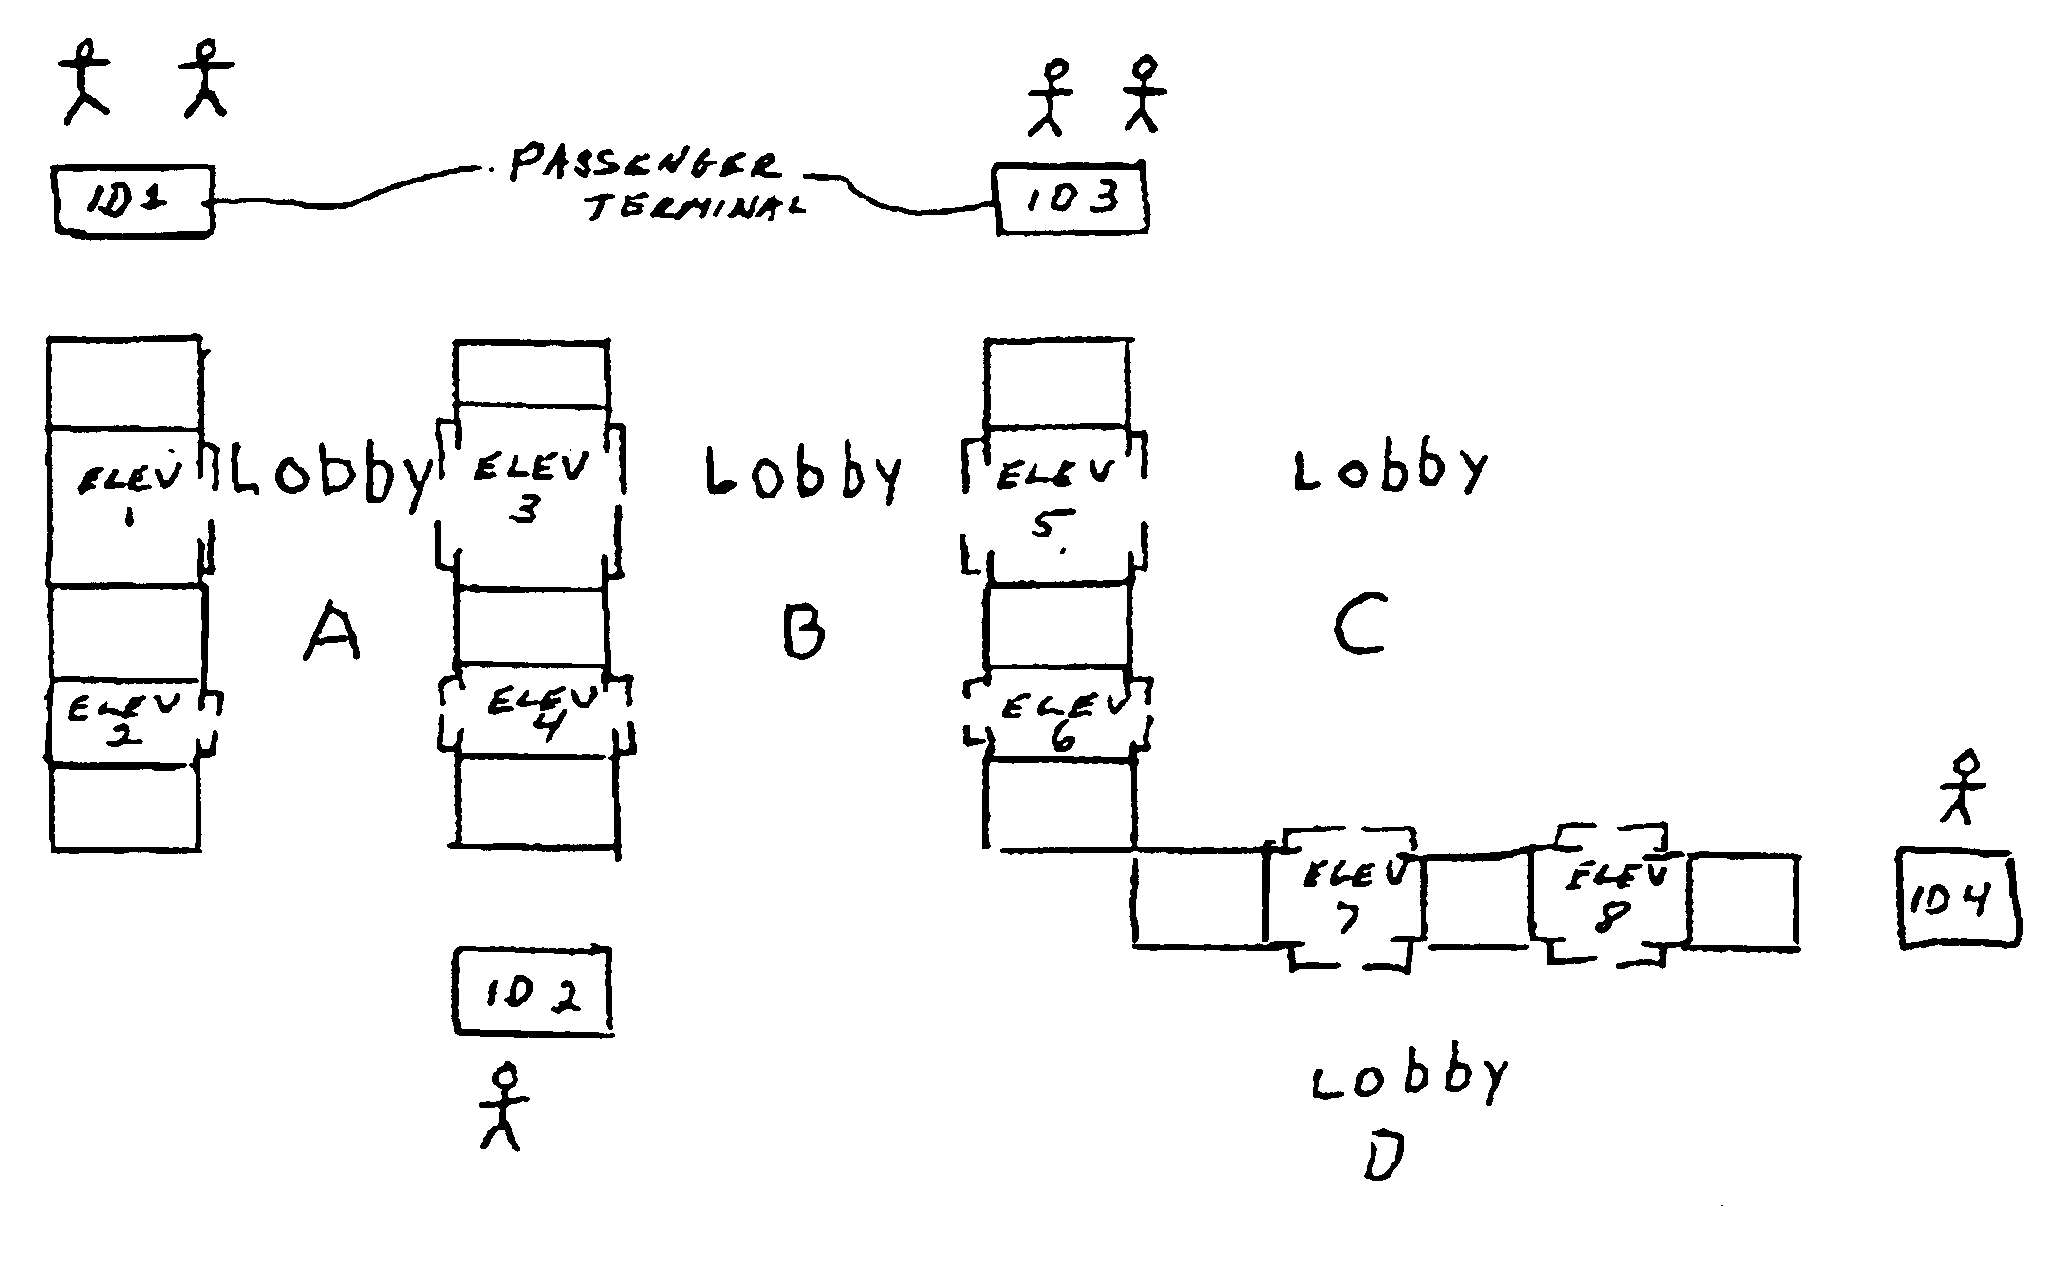 Method for allocating passengers to an elevator